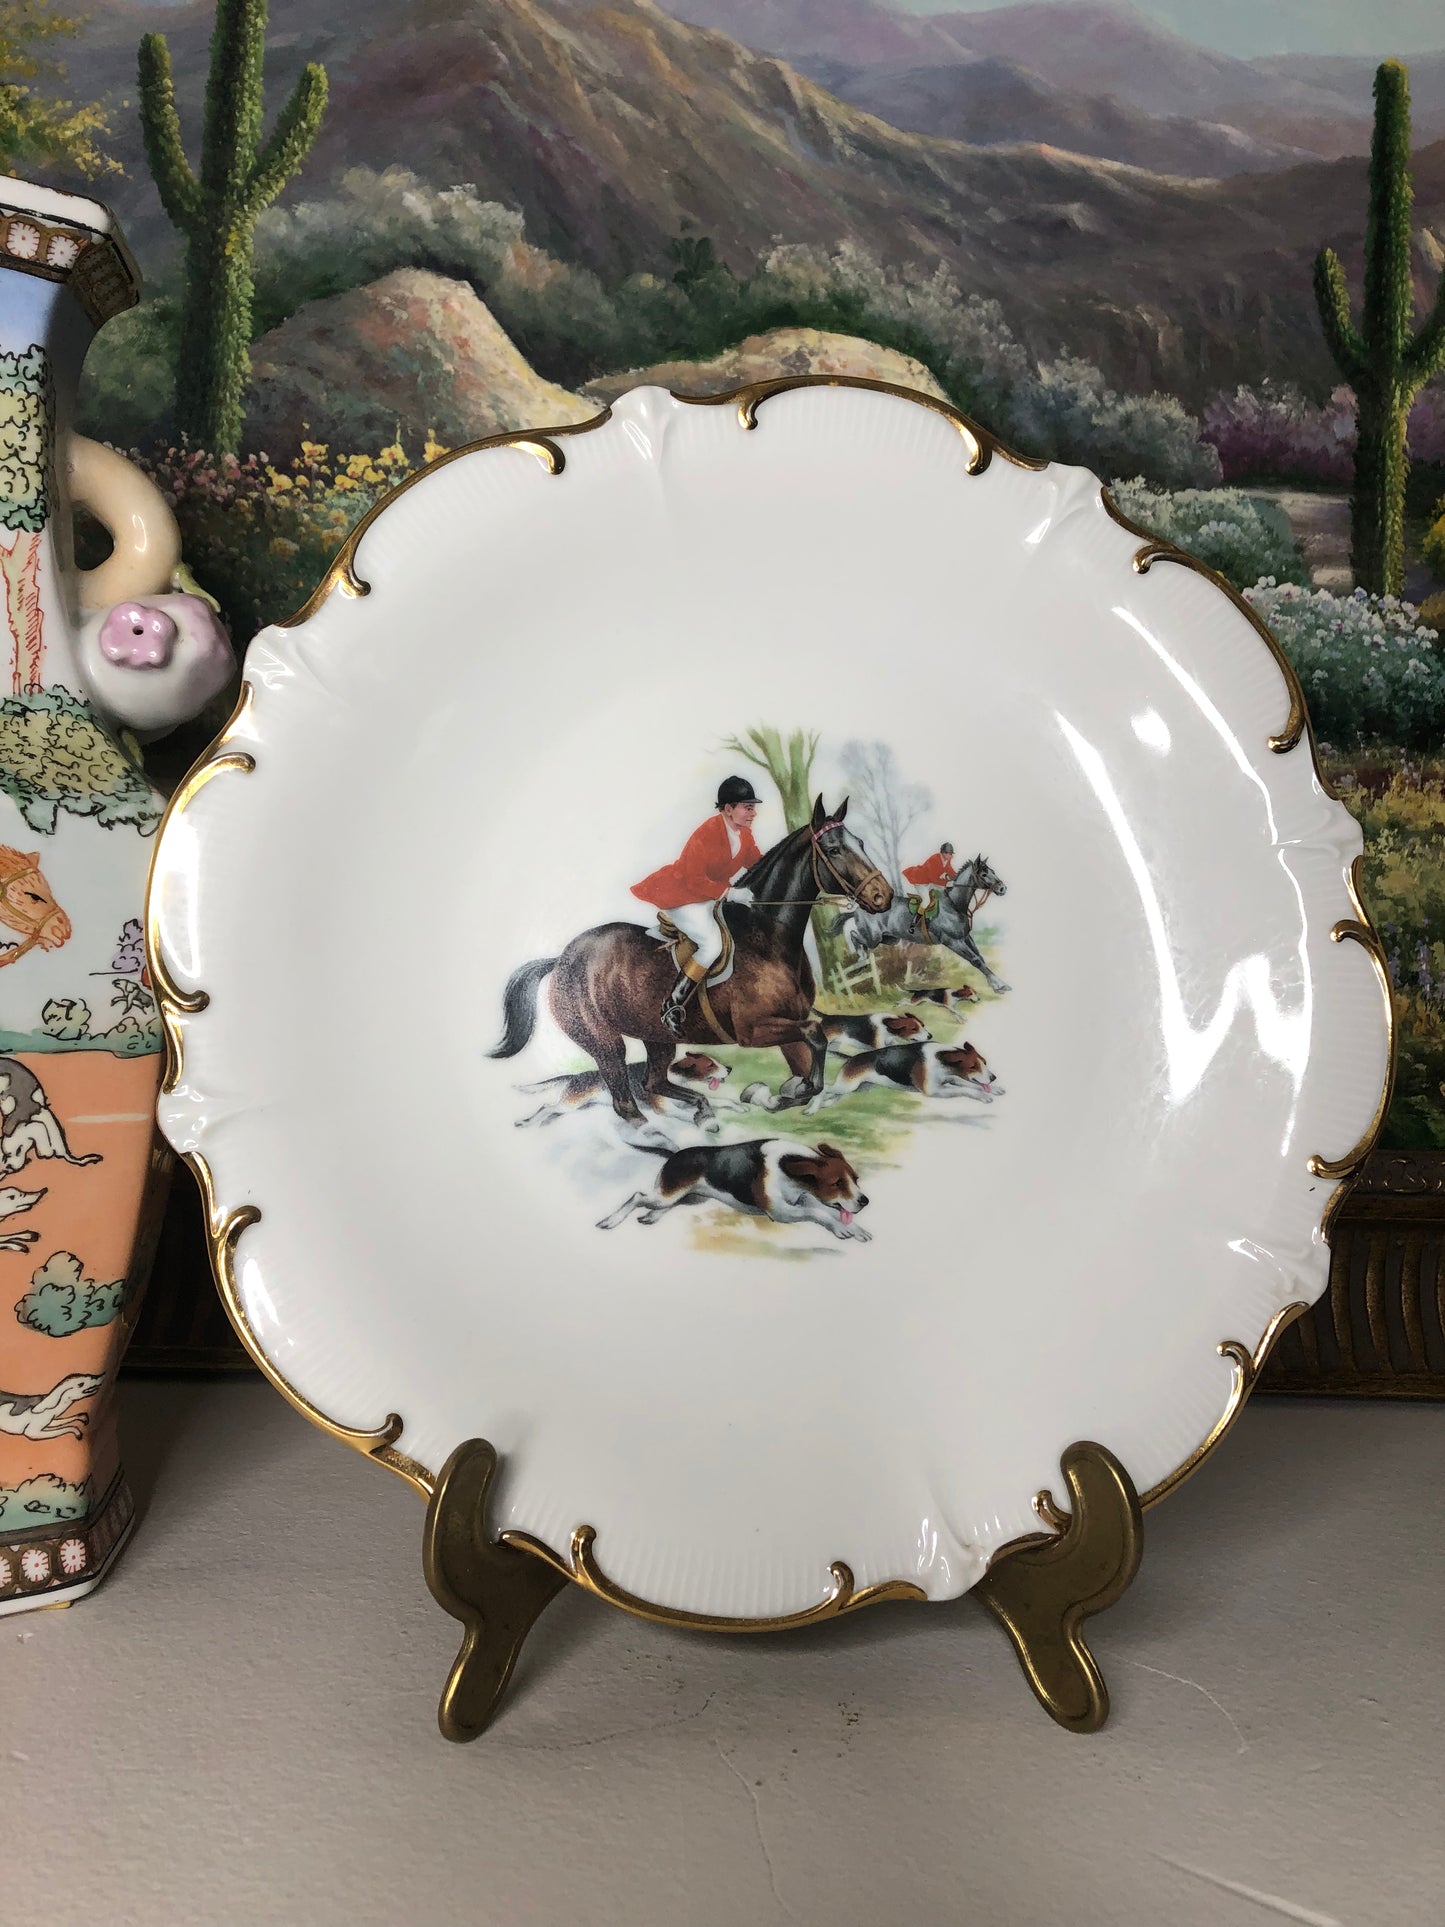 Lovely Vintage Hunting Scene with dogs 10” platter - Excellent condition!